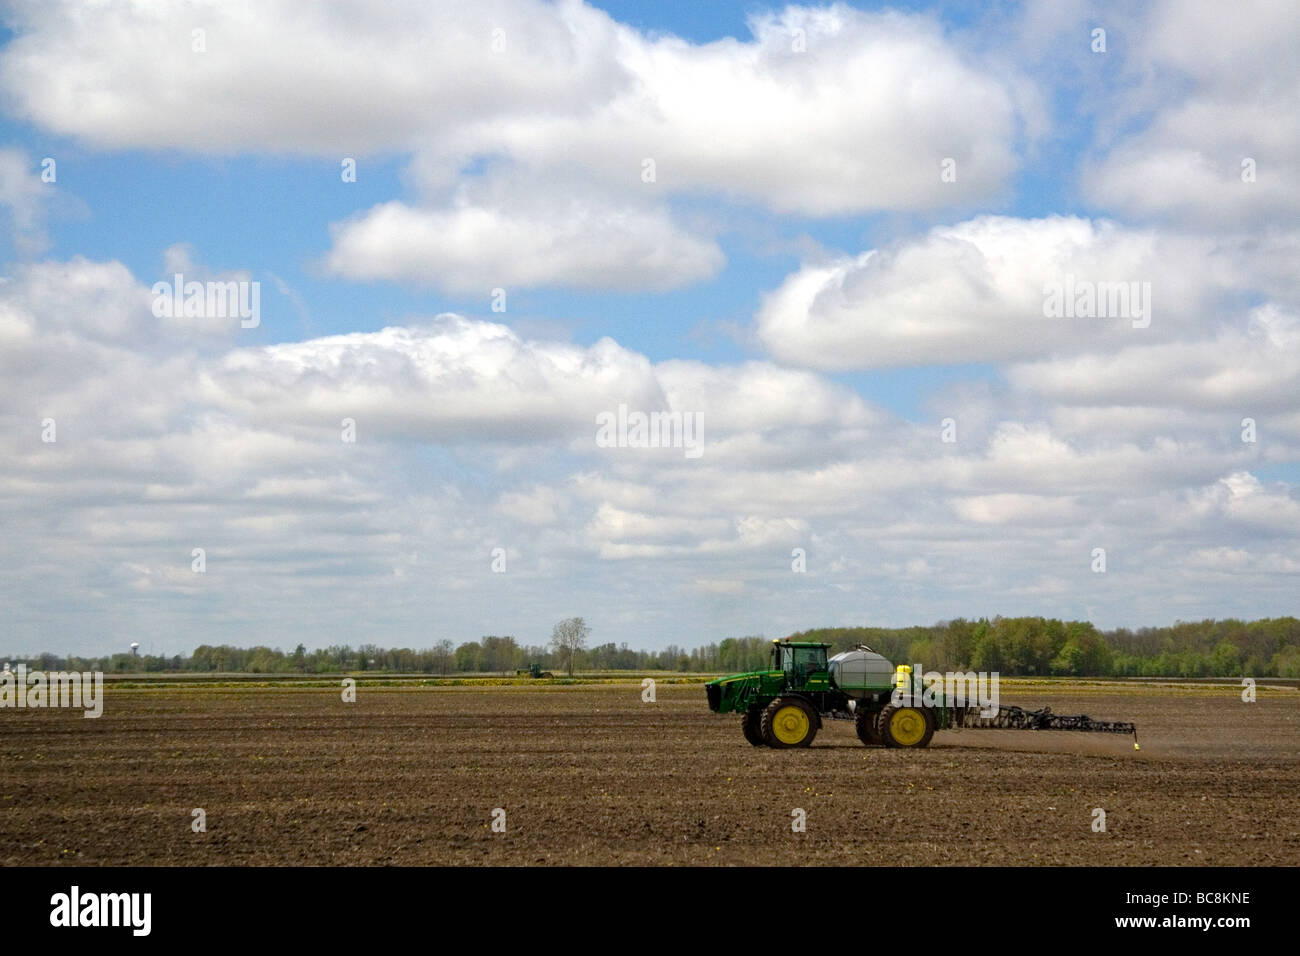 Tractor spraying herbicide on tilled crop soil in Lapeer County Michigan USA Stock Photo